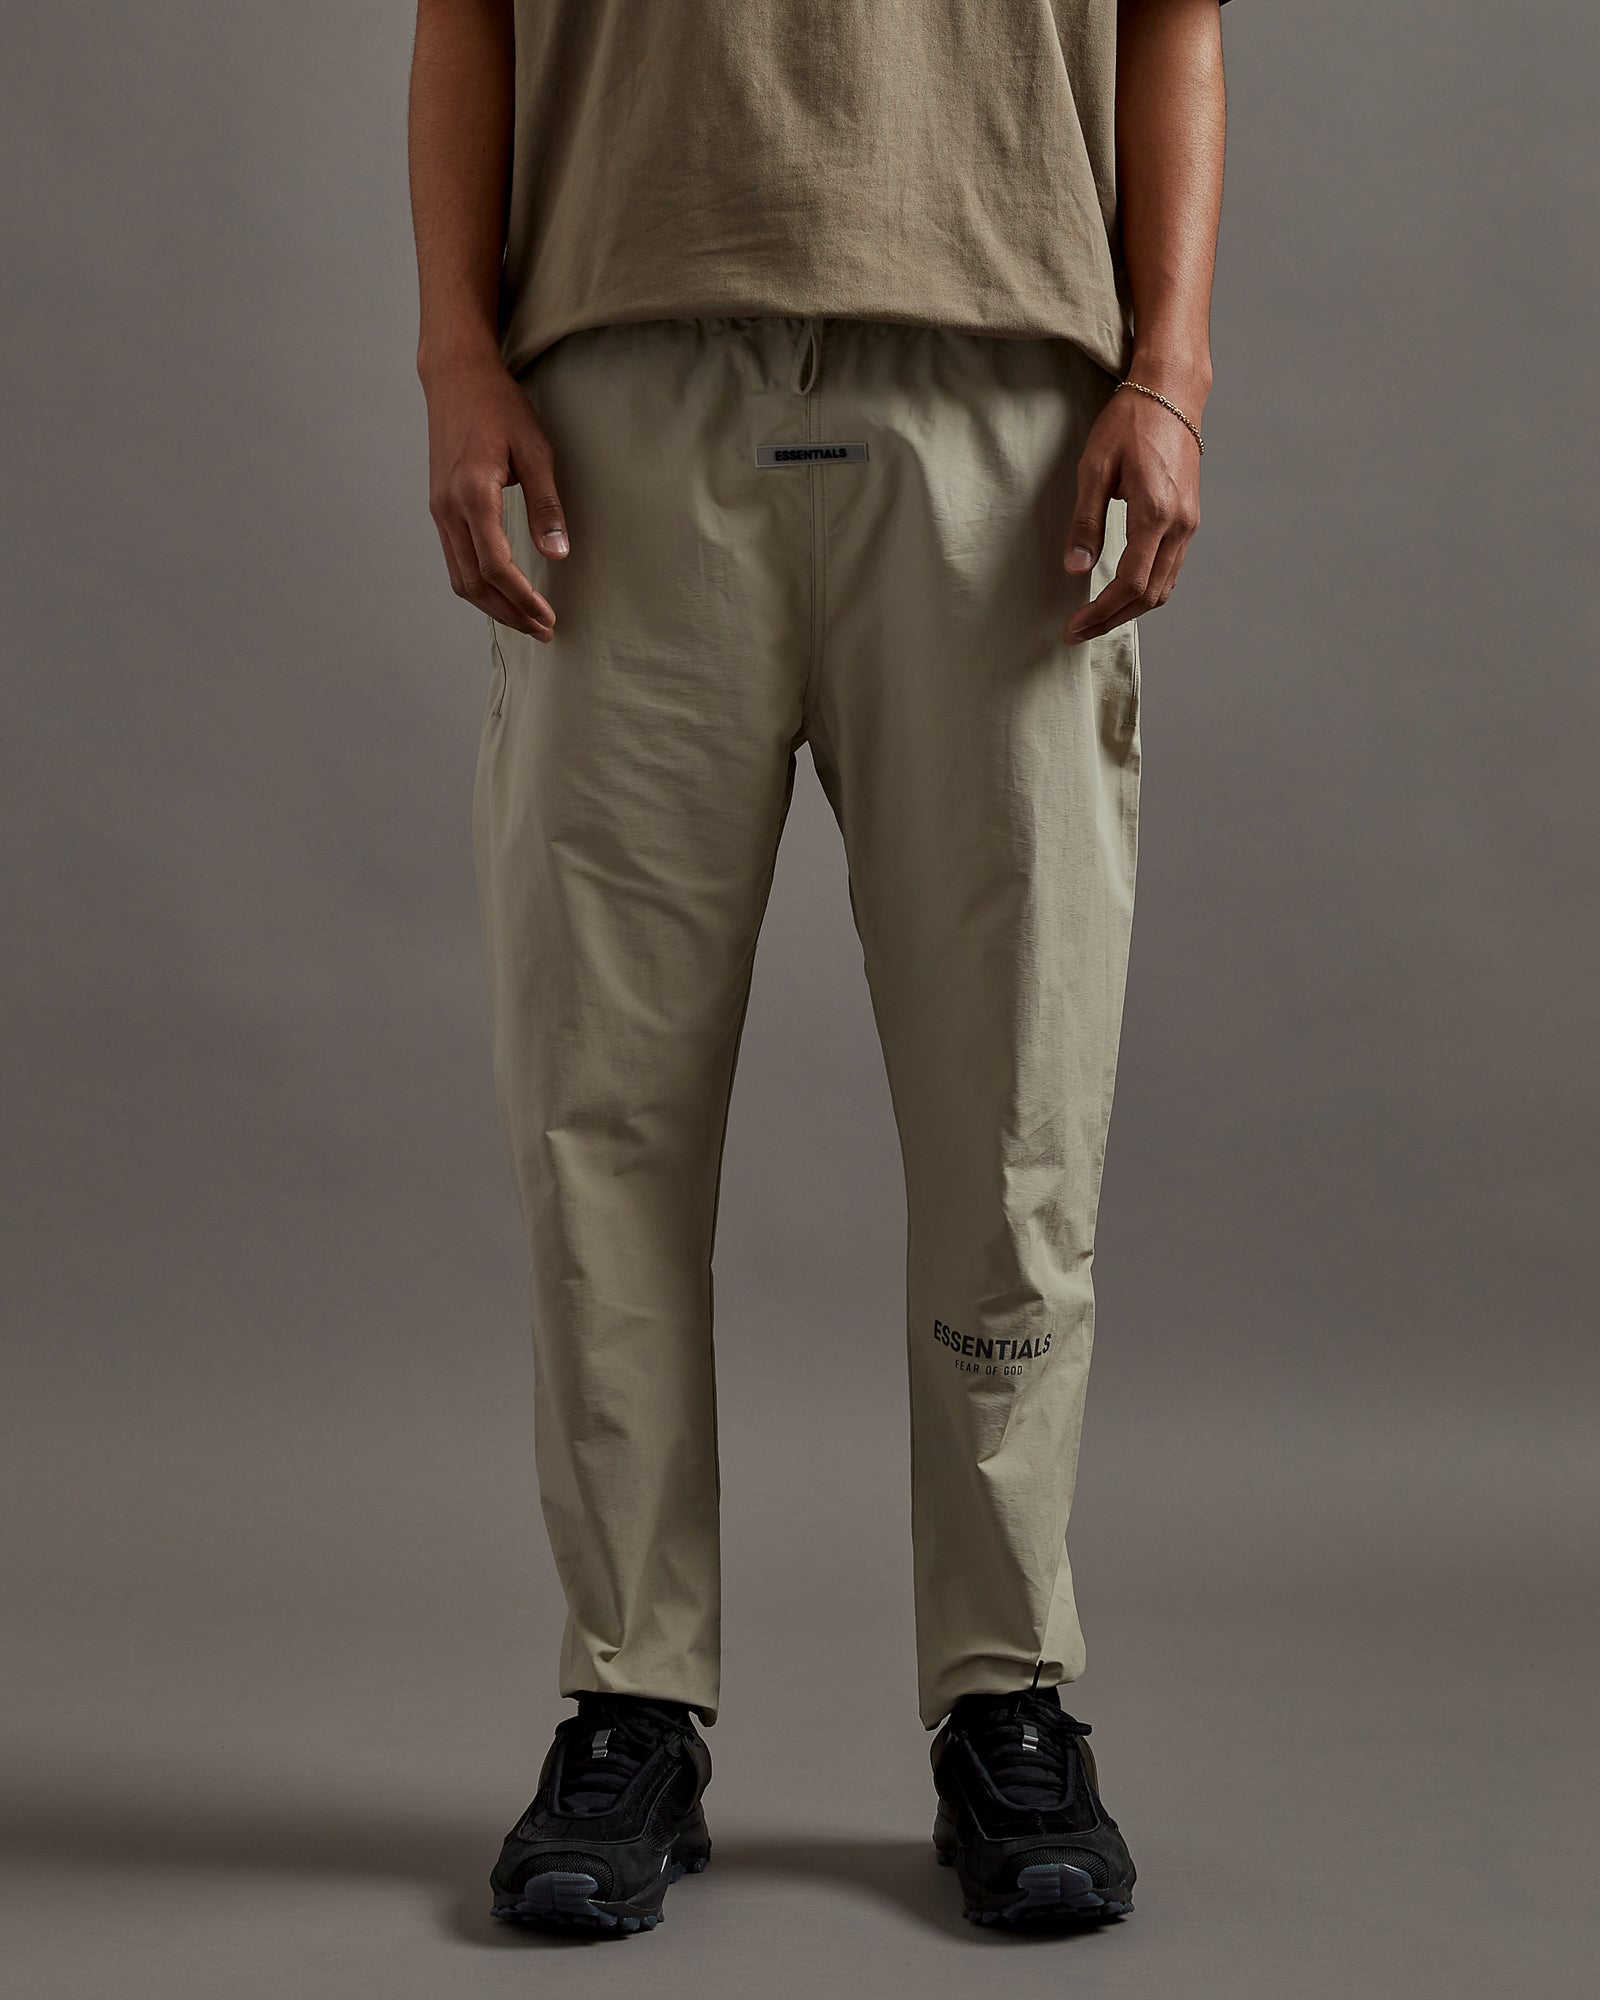 Fear of God Nylon Cargo Pant in Olive Green